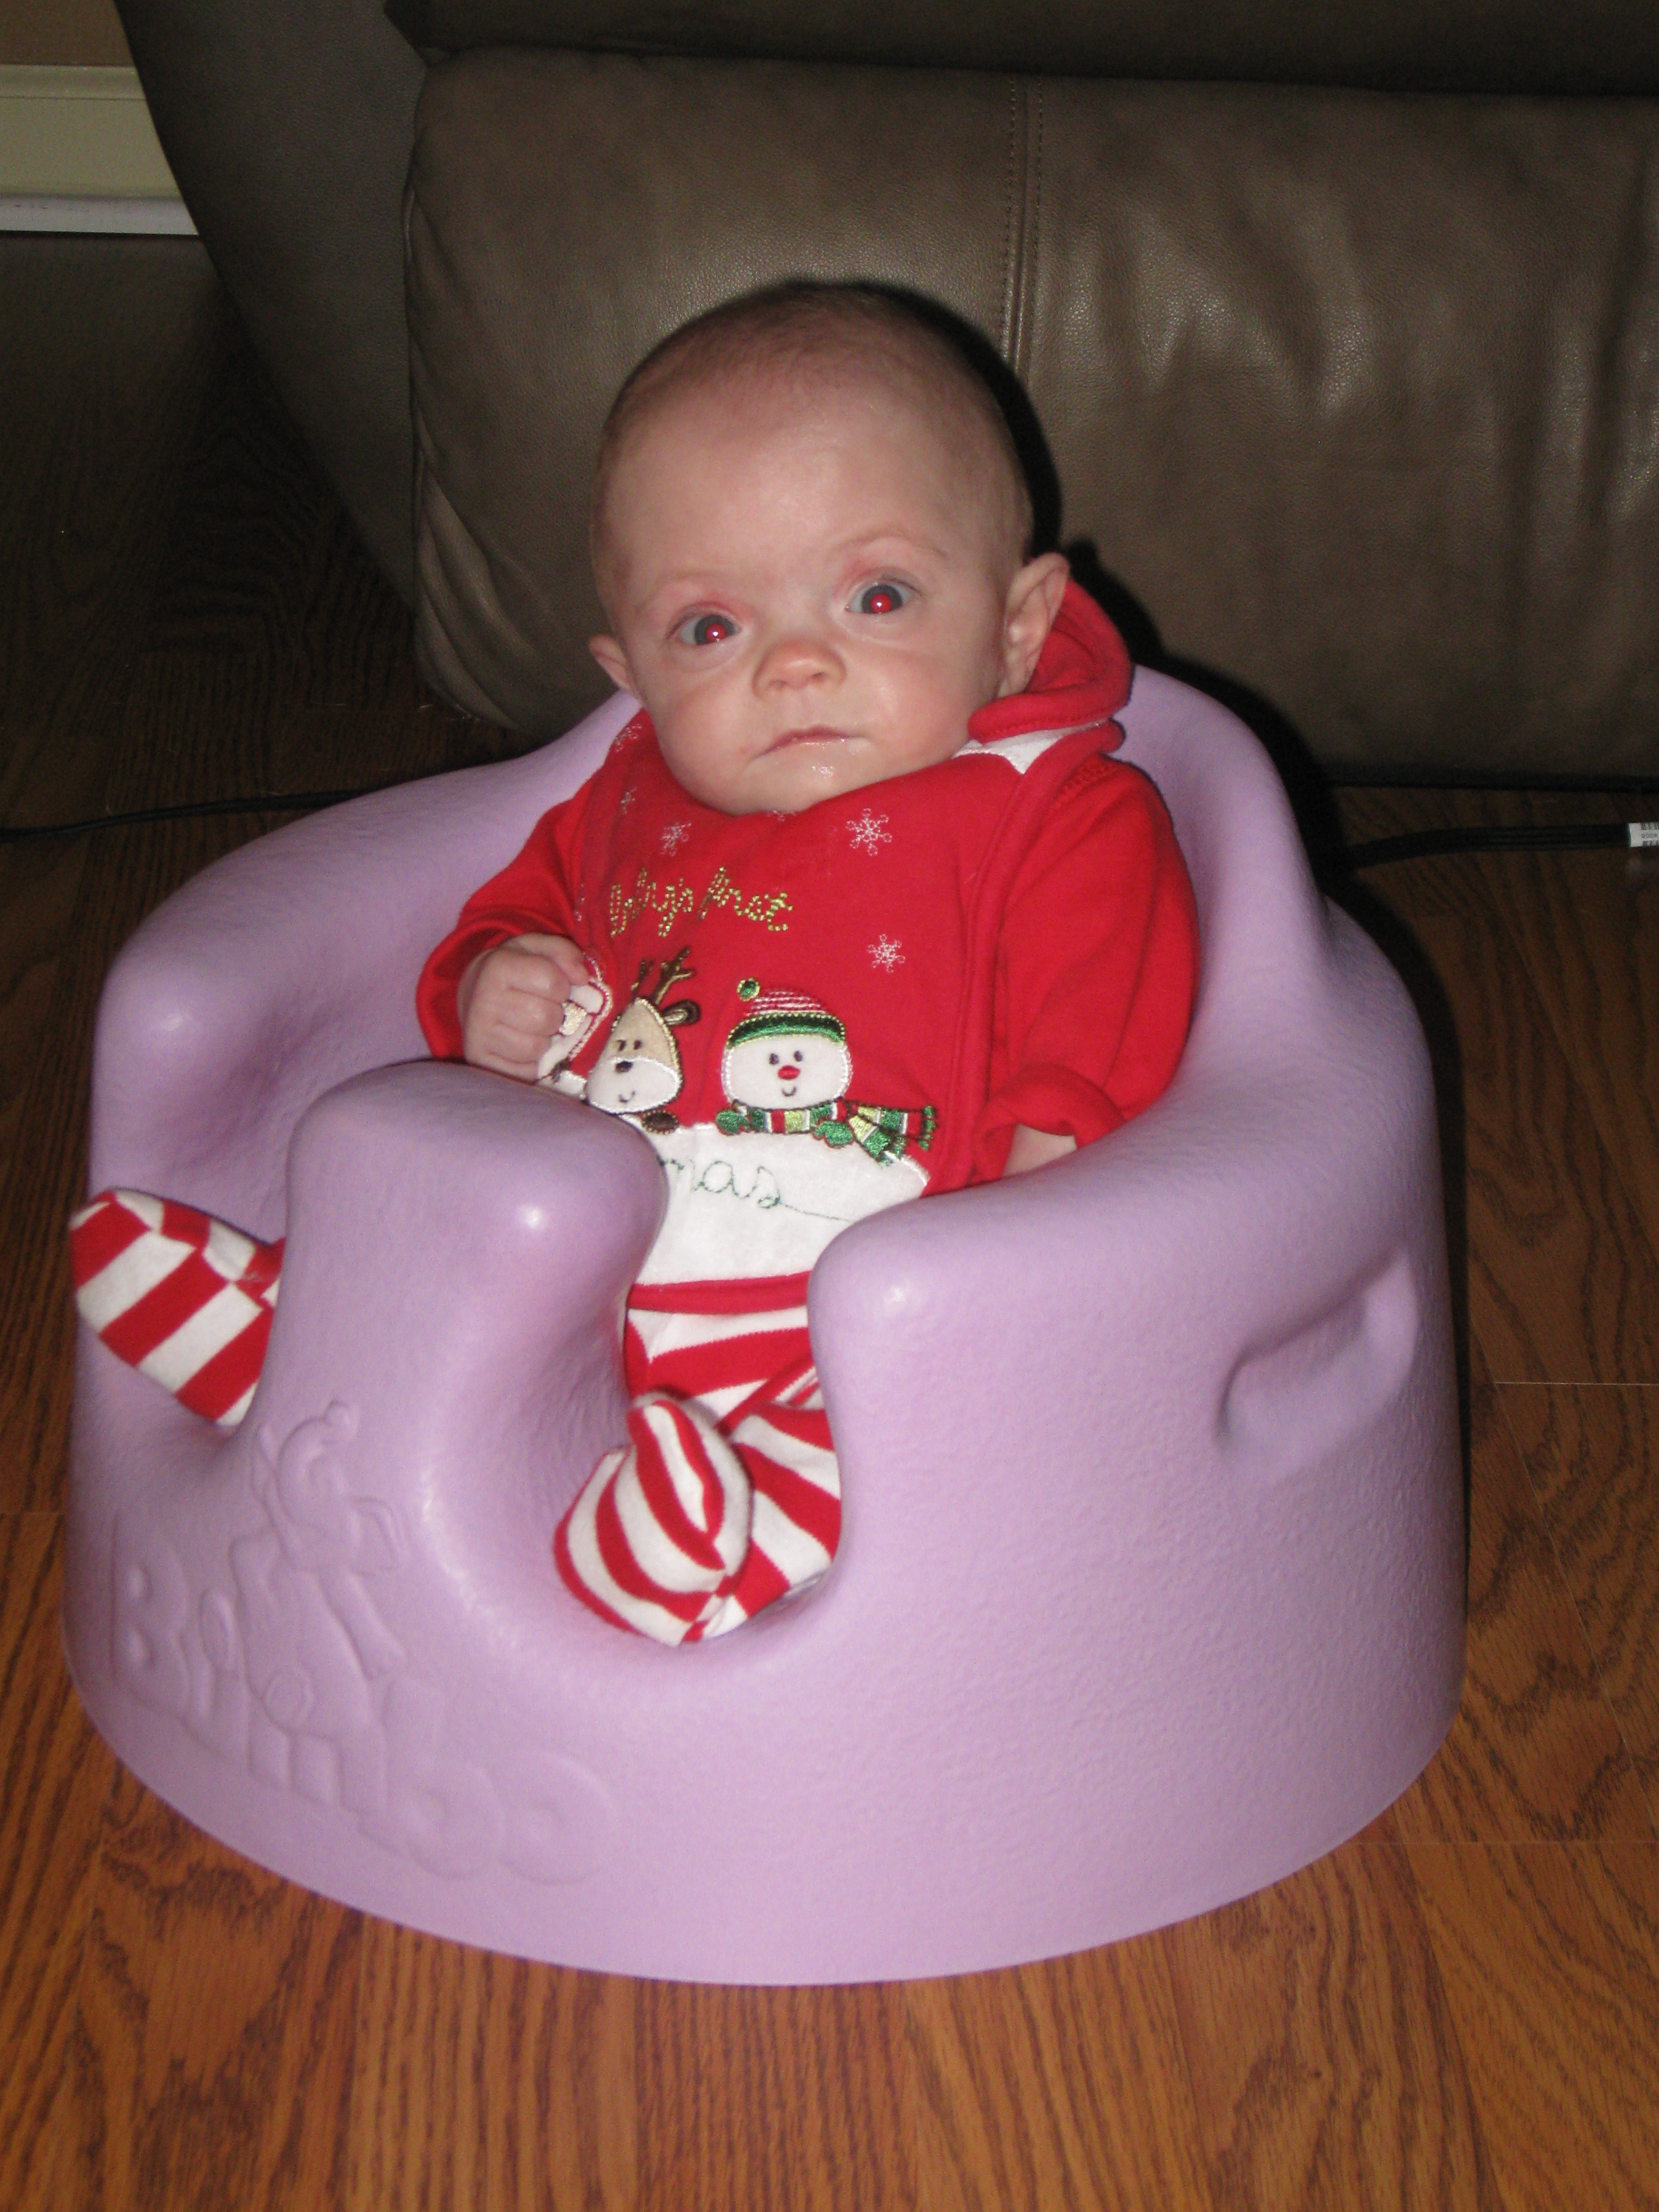 In my new Bumbo seat from Aunt Jenny Speas and crew.  I'm such a big girl in a tiny girl's body!